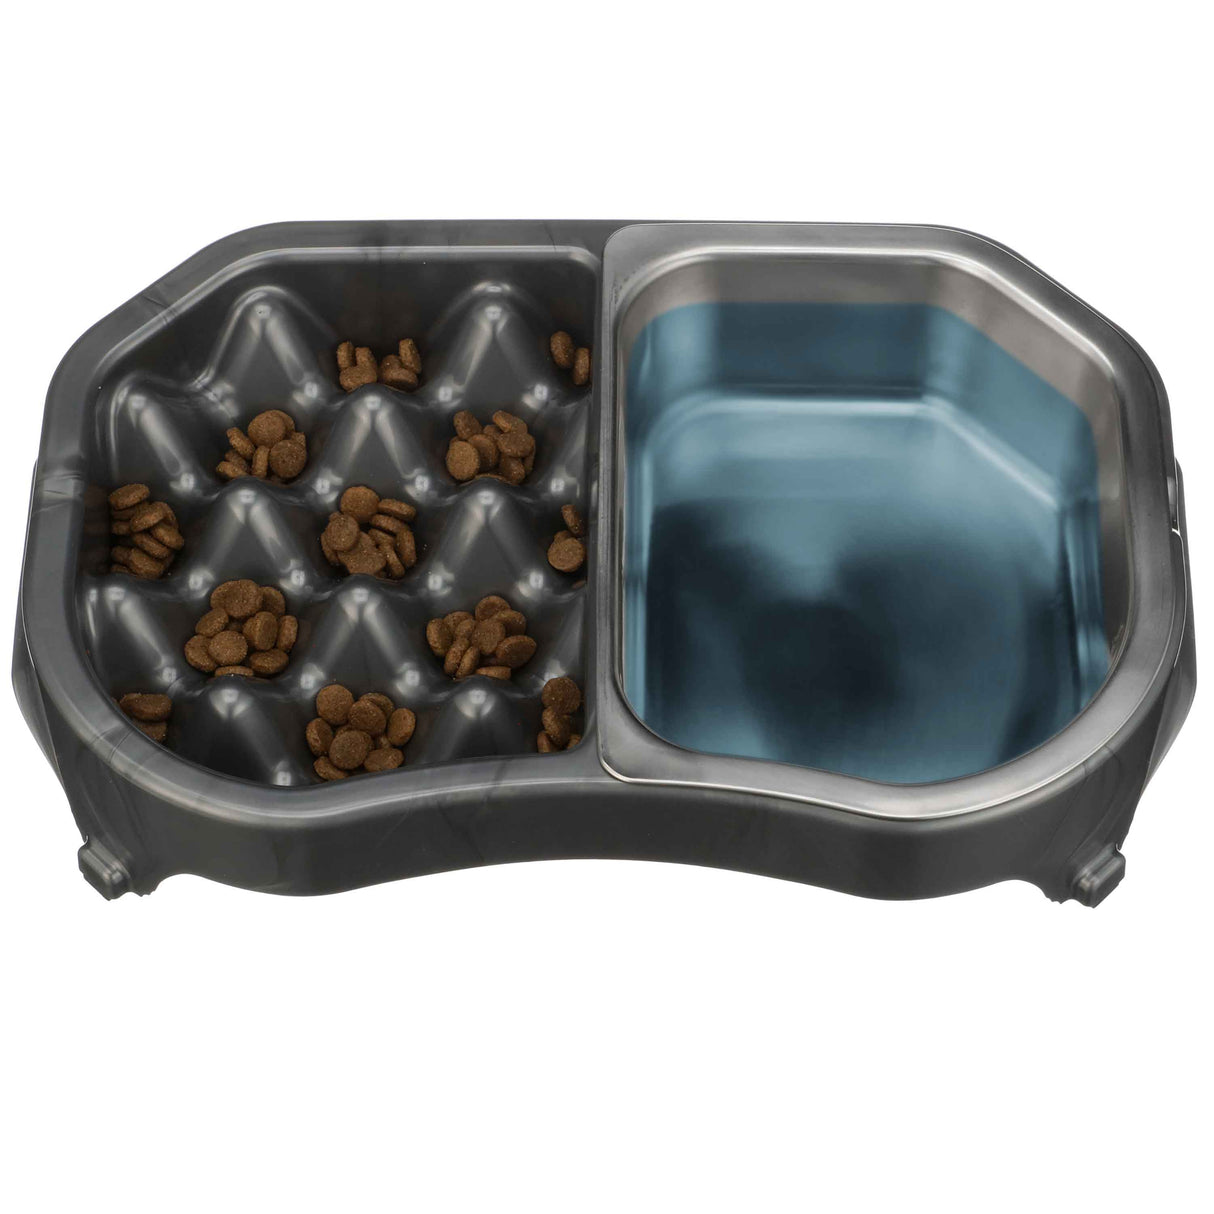 Gunmetal Grey Double Diner with stainless steel insert with food and water